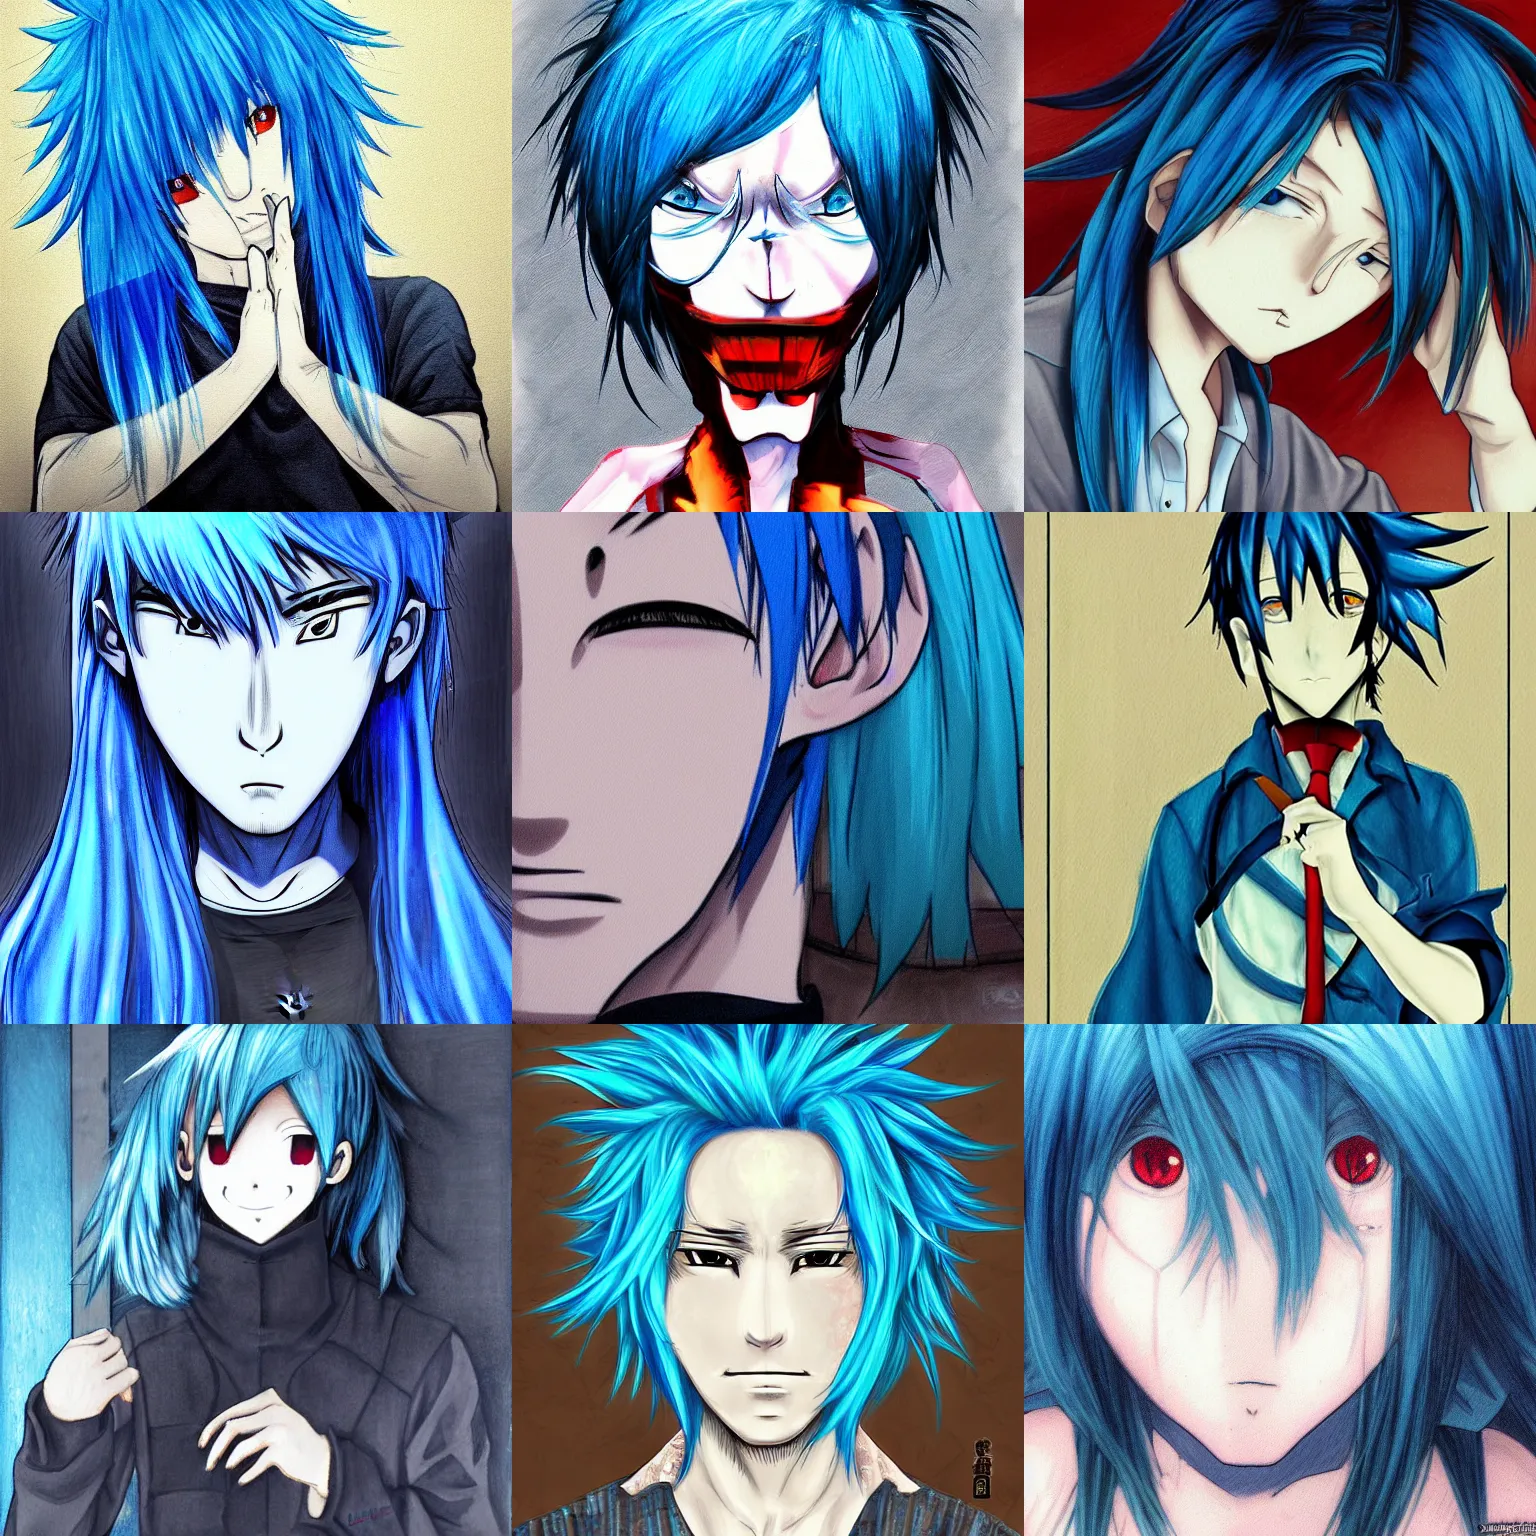 Prompt: a cartoon picture of a man with blue hair, a detailed painting by nagasawa rosetsu, featured on pixiv, transgressive art, anime, deviantart hd, creepypasta